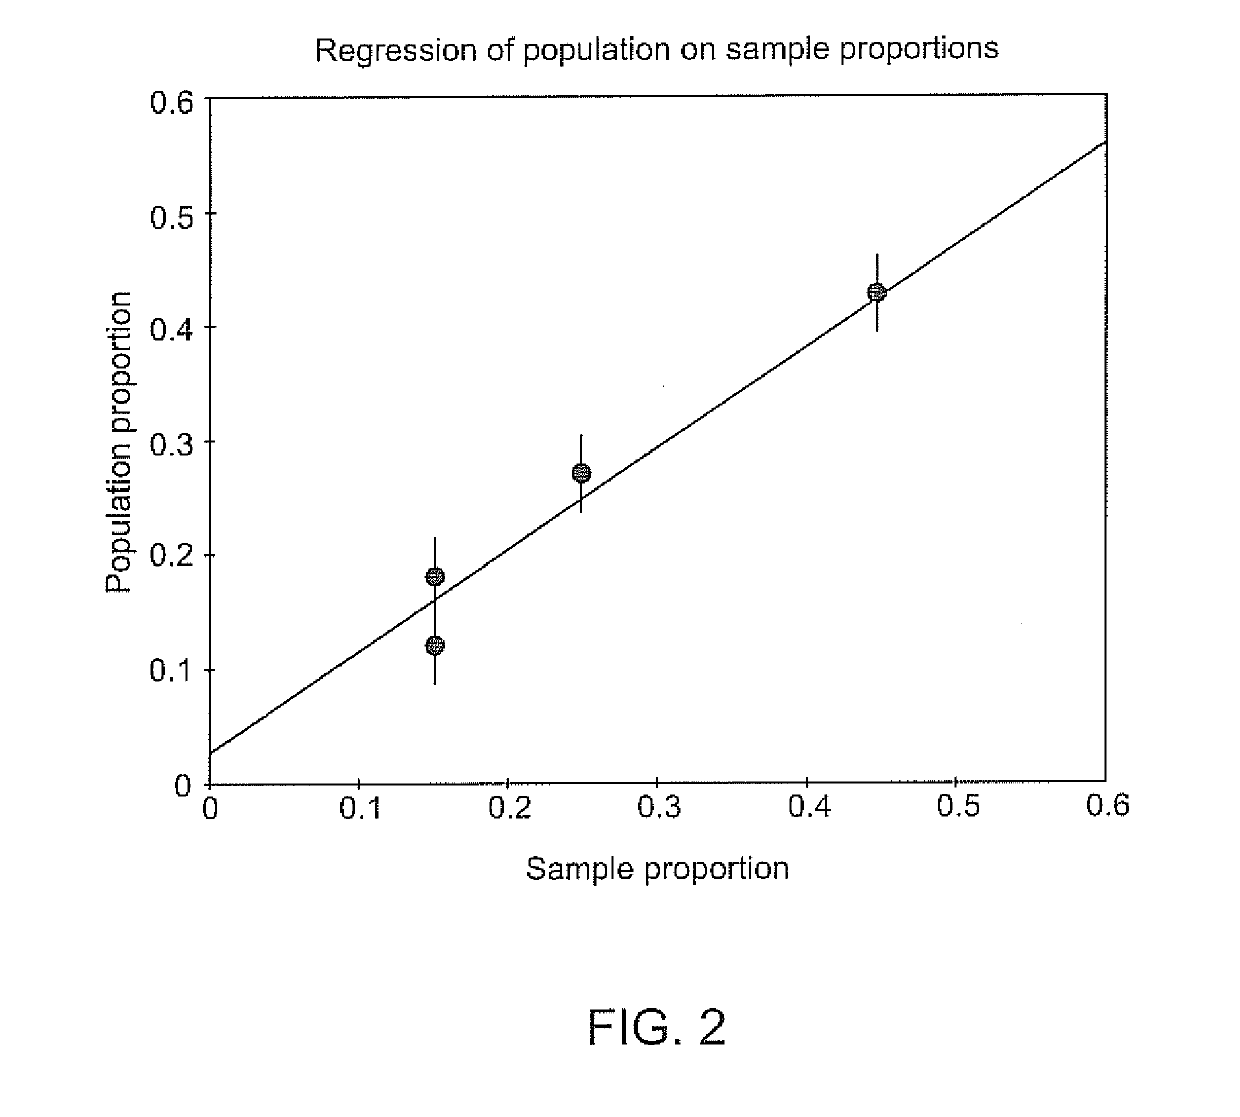 Population-sample regression in the estimation of population proportions